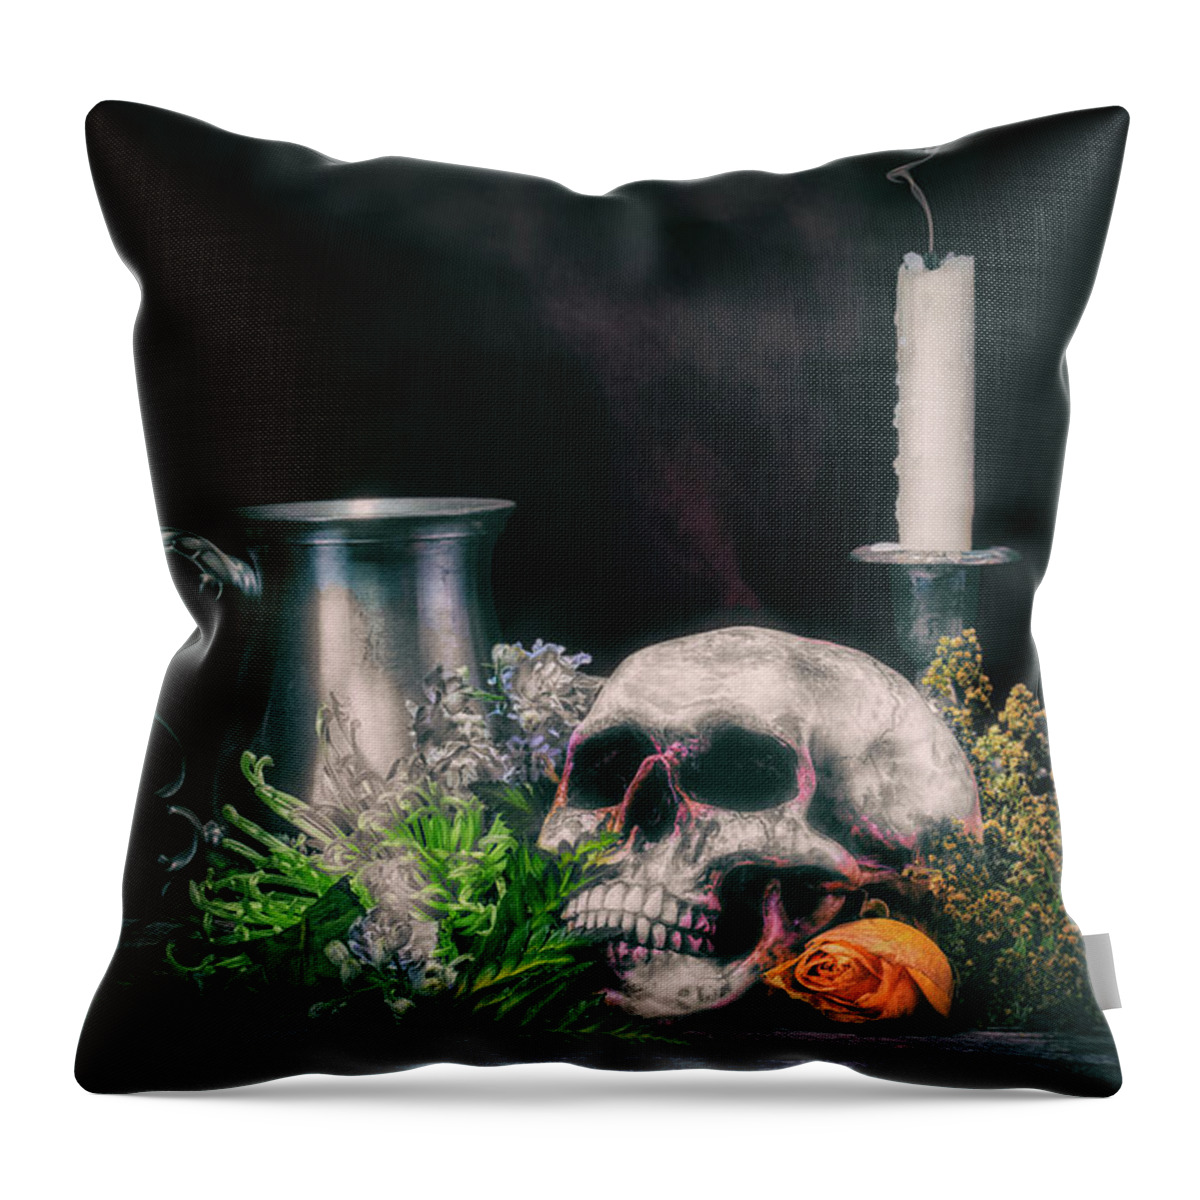 Human Throw Pillow featuring the photograph Skull With Flowers by Tom Mc Nemar